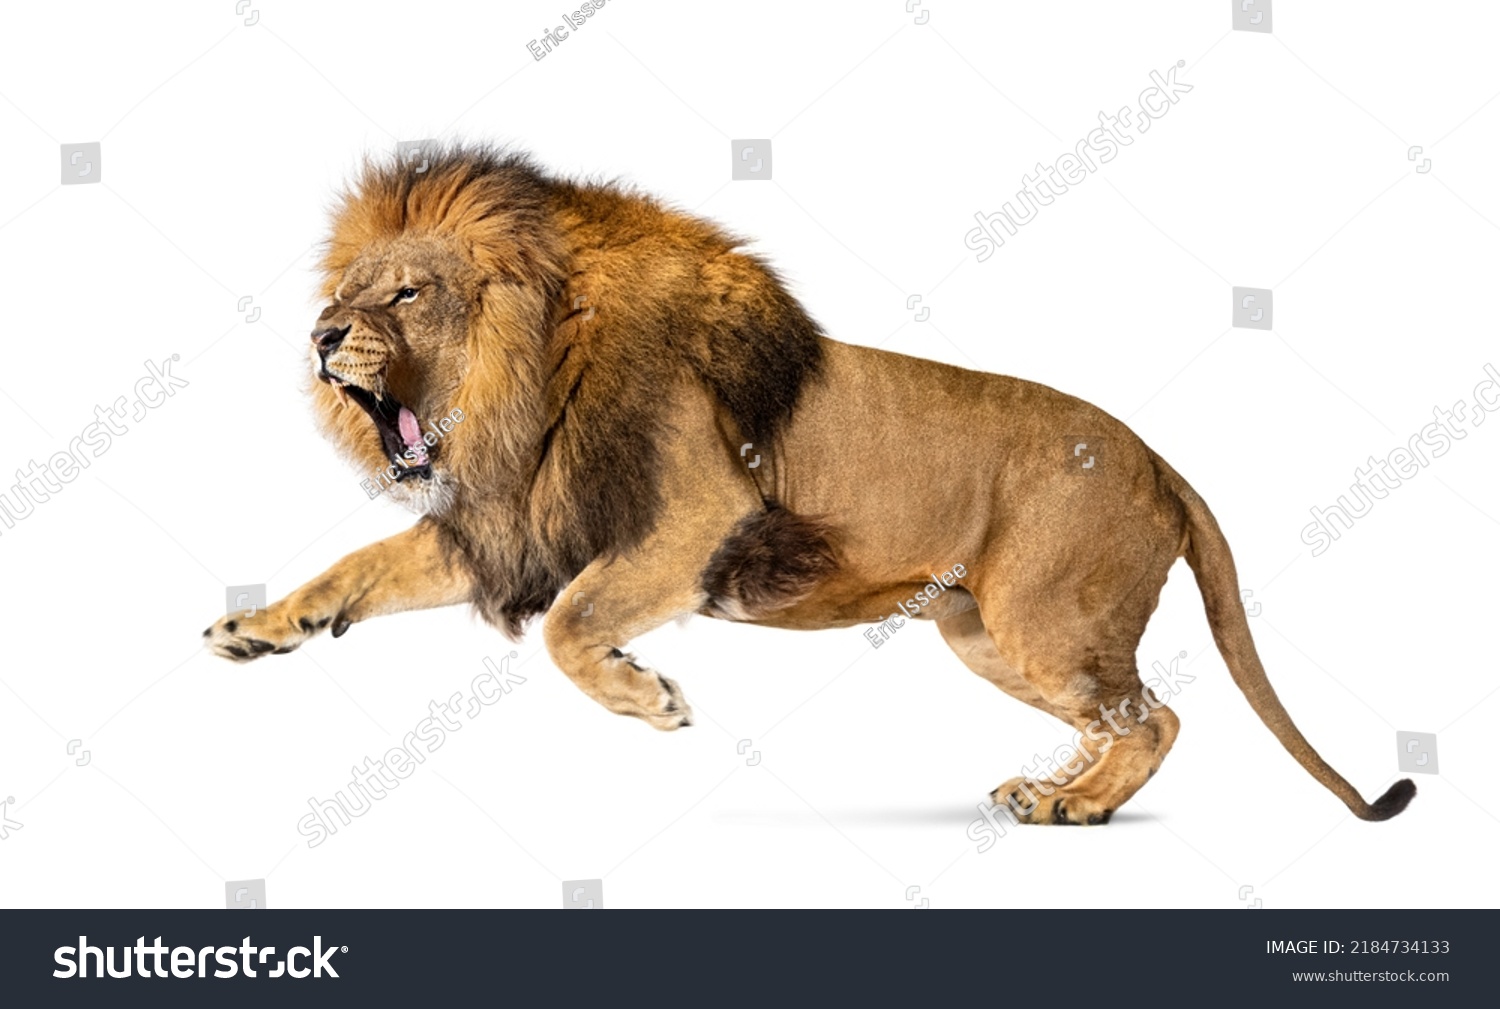 Male adult lion, Panthera leo, leaping mouth open, isolated on white #2184734133